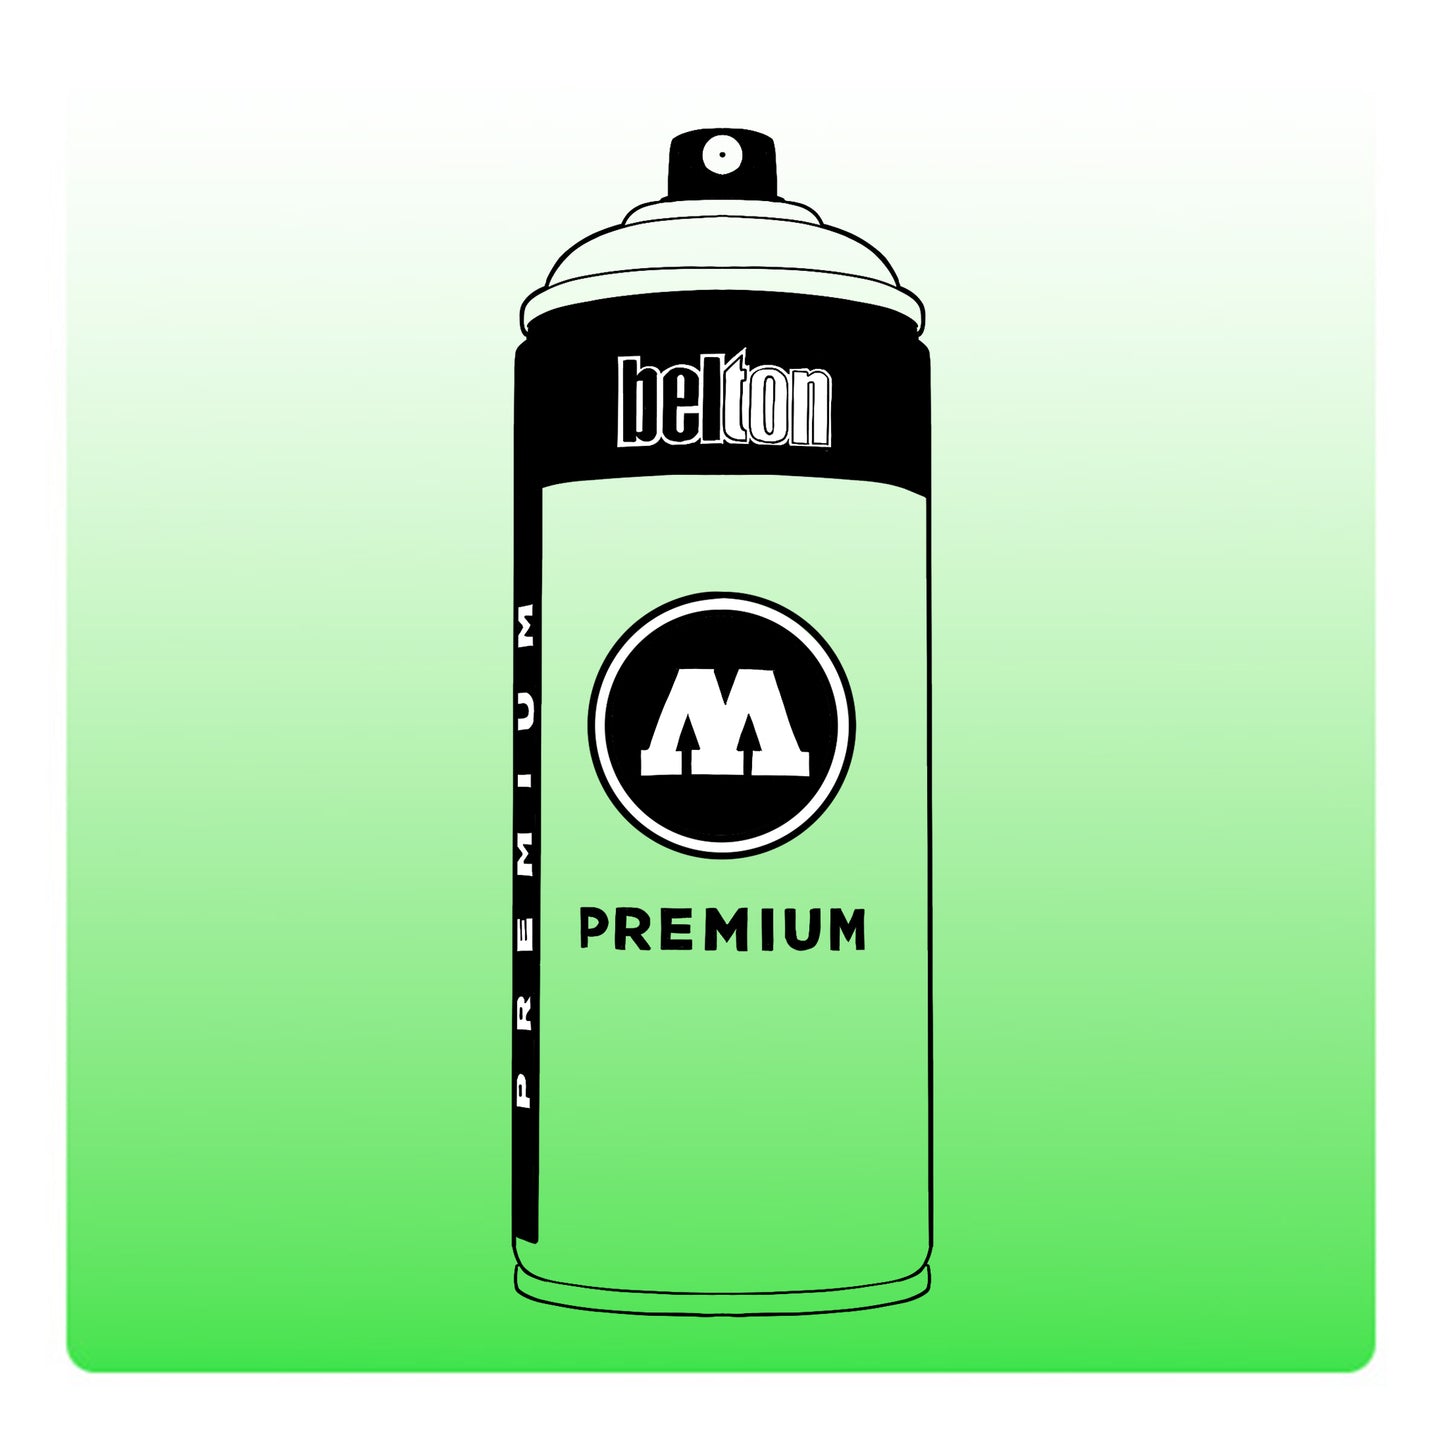 A line drawing of a spray paint can with a transparent, green color swatch.